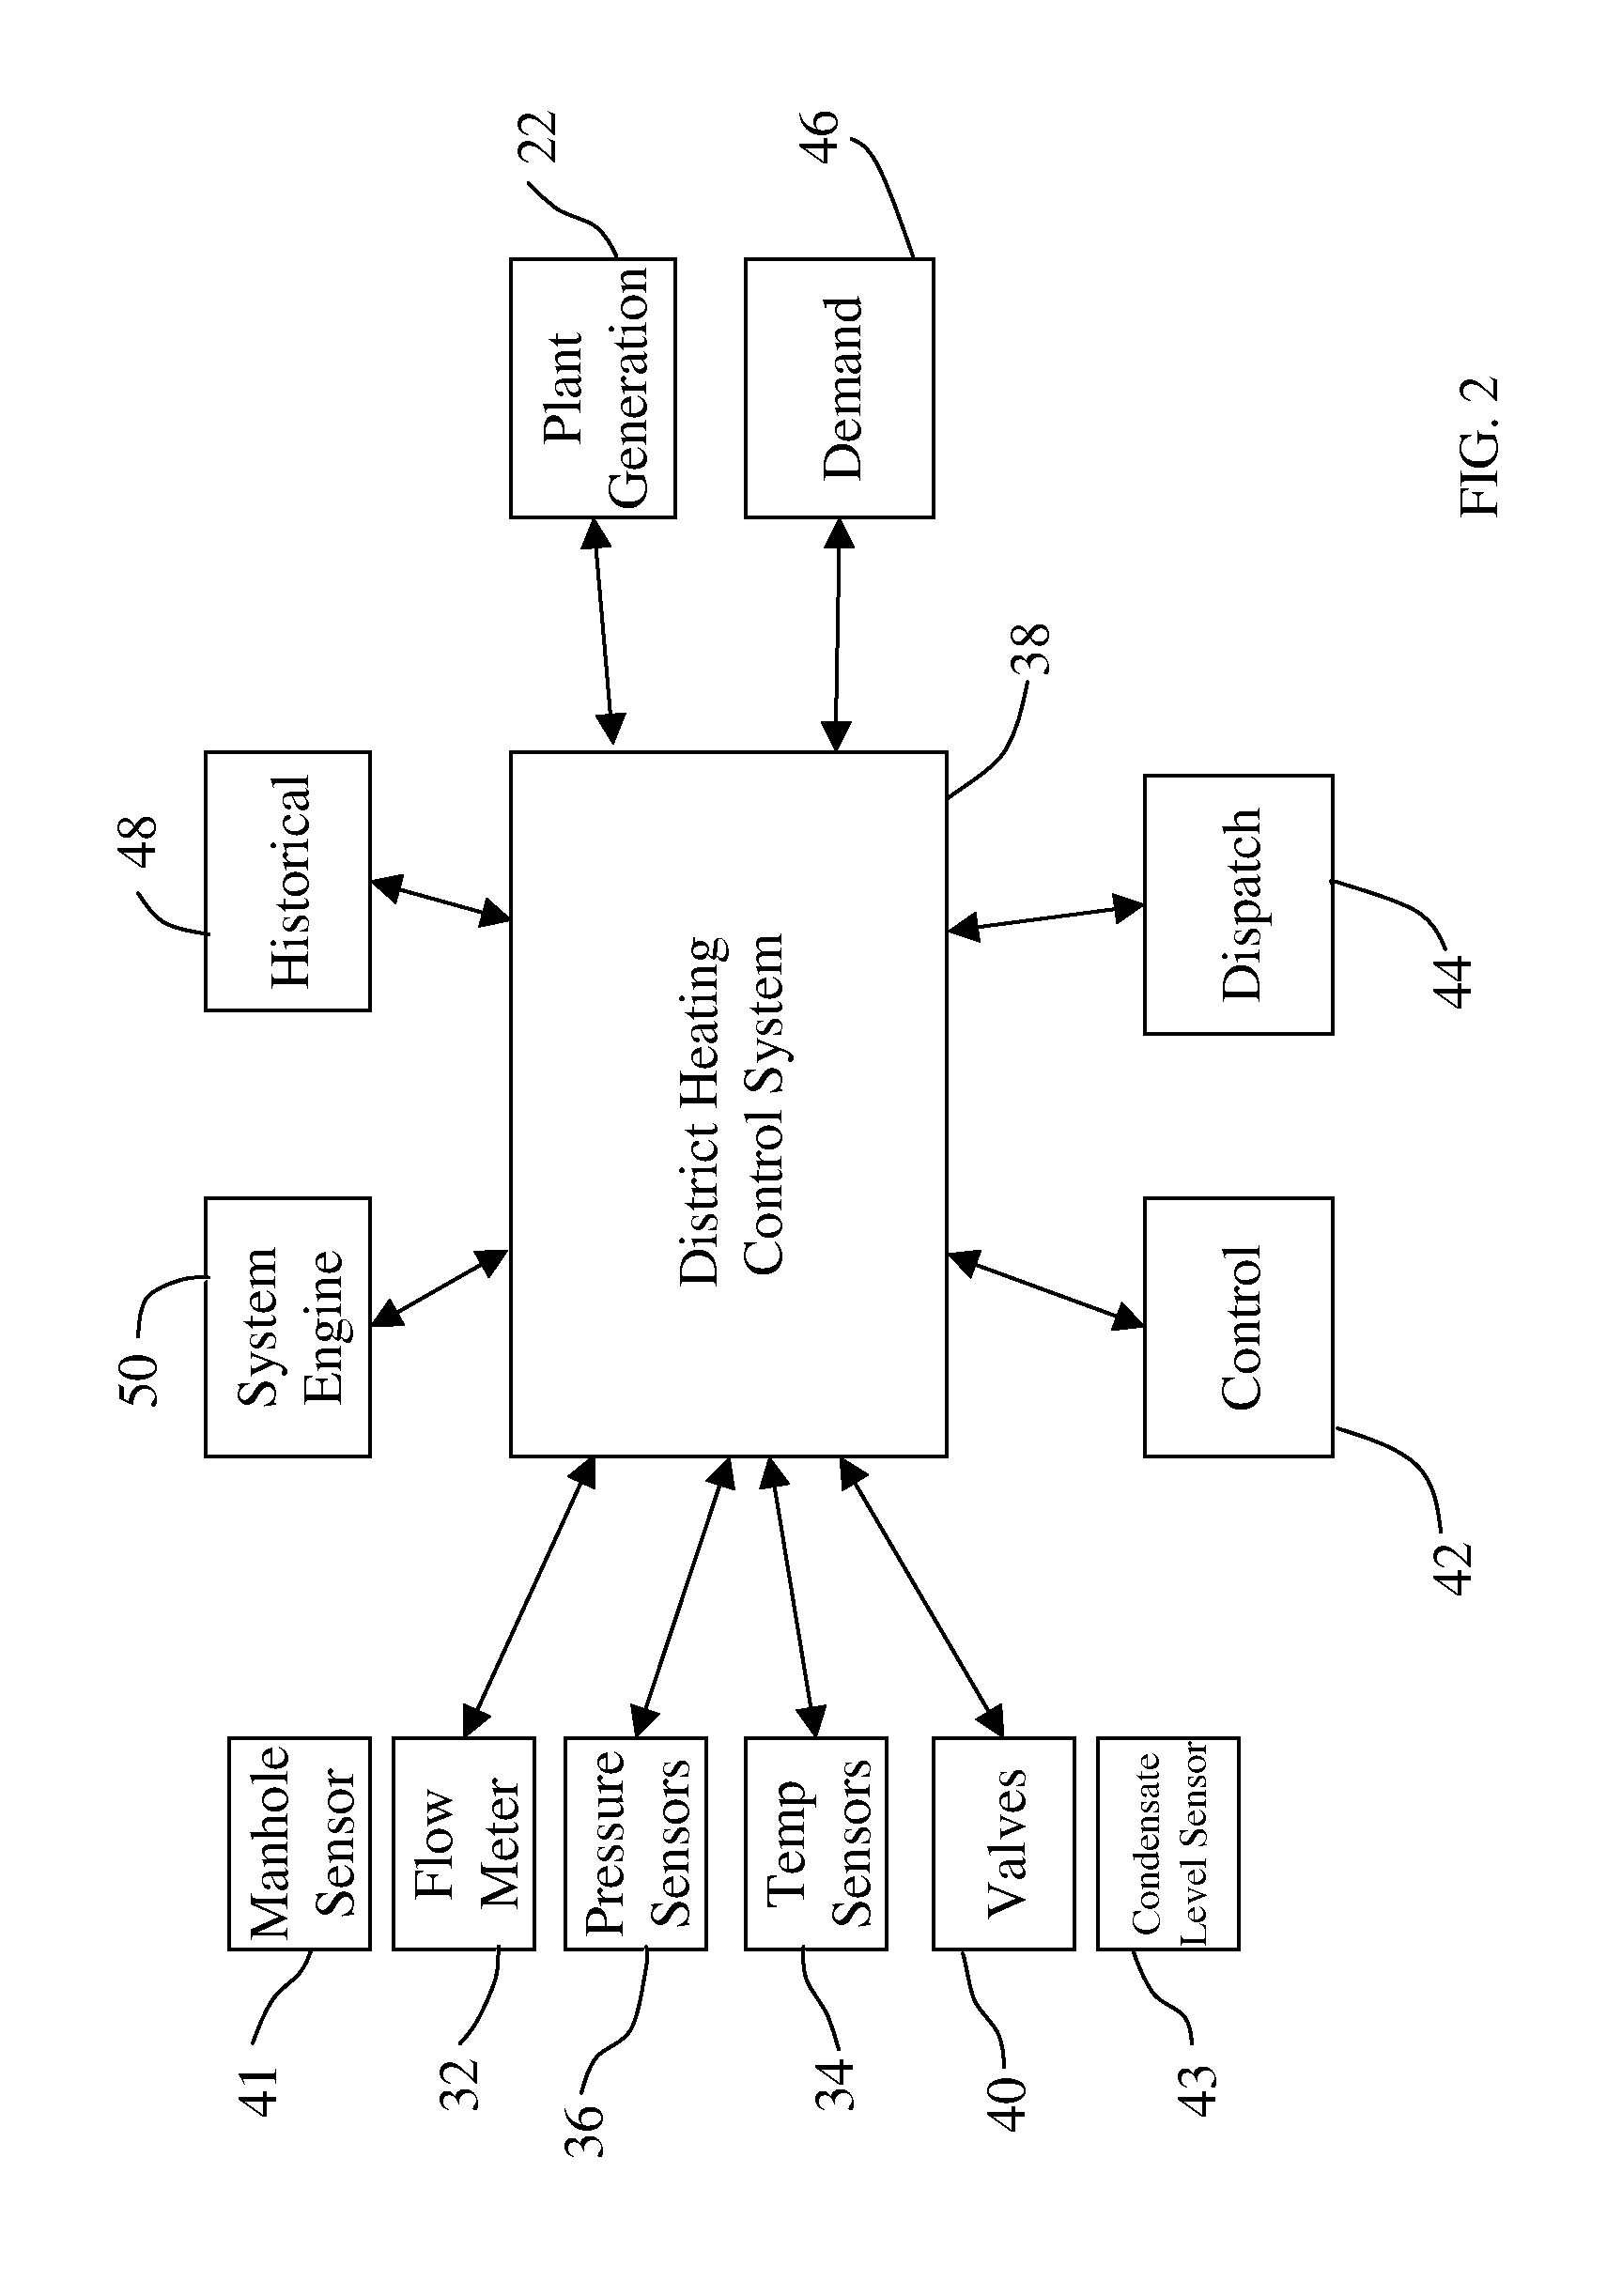 System and Method for operating steam systems